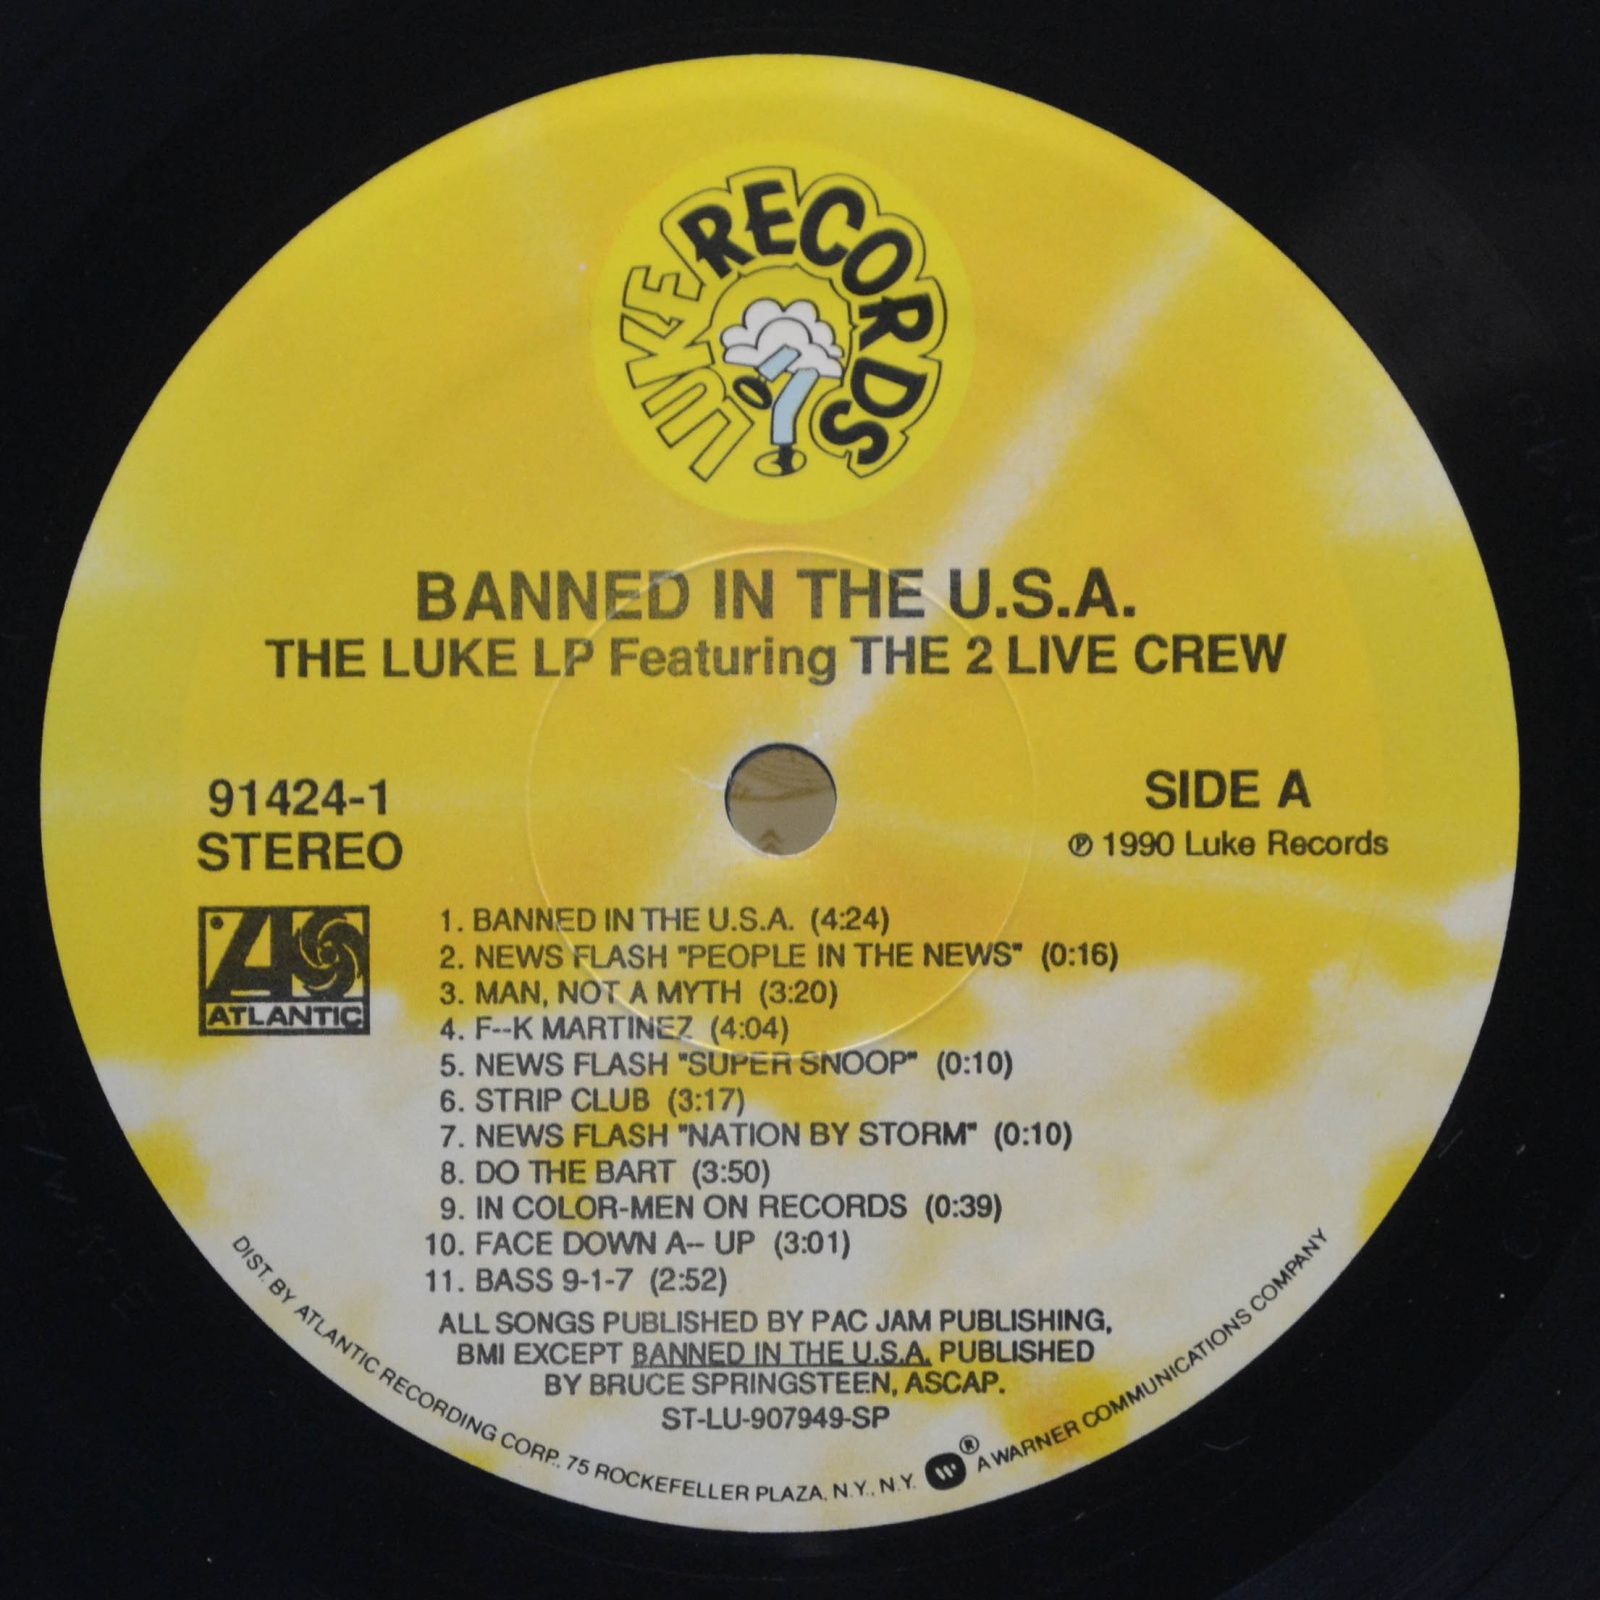 Luke feat. The 2 Live Crew — Banned In The U.S.A. - The Luke LP, 1990